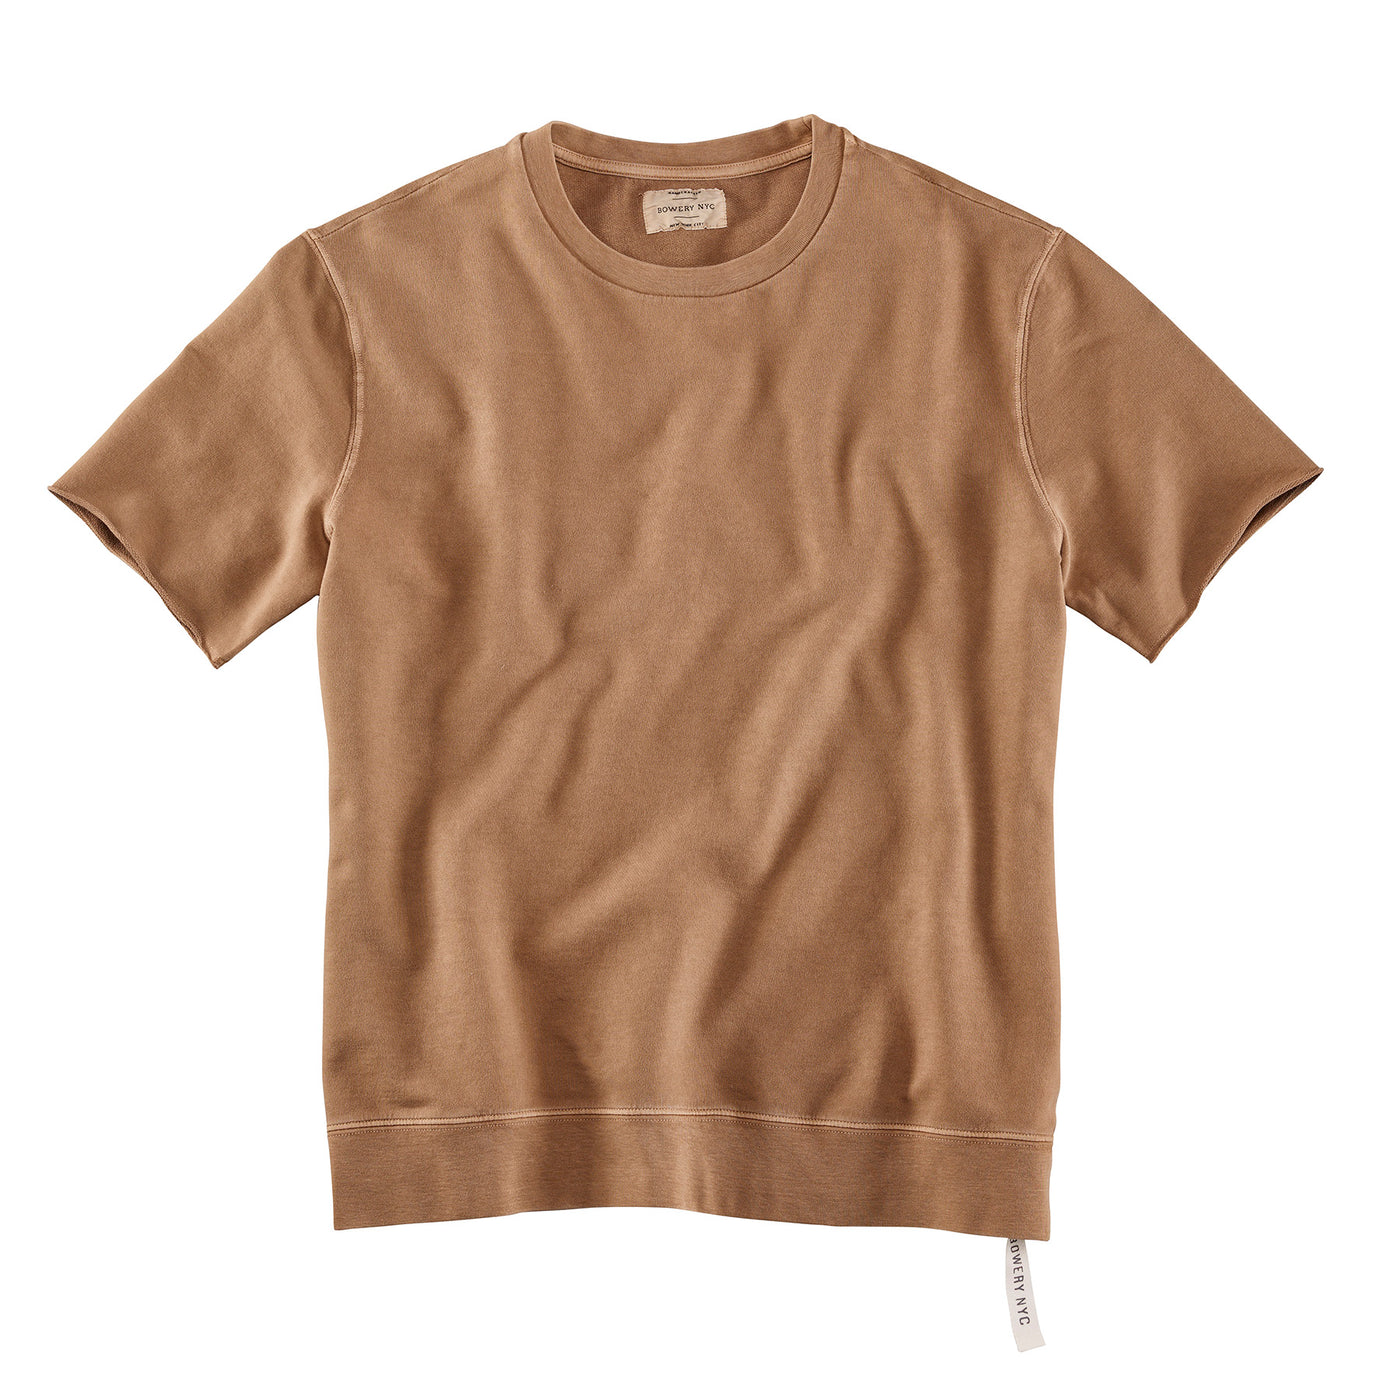 Bowery NYC Essential Military Short Sleeve Sweater